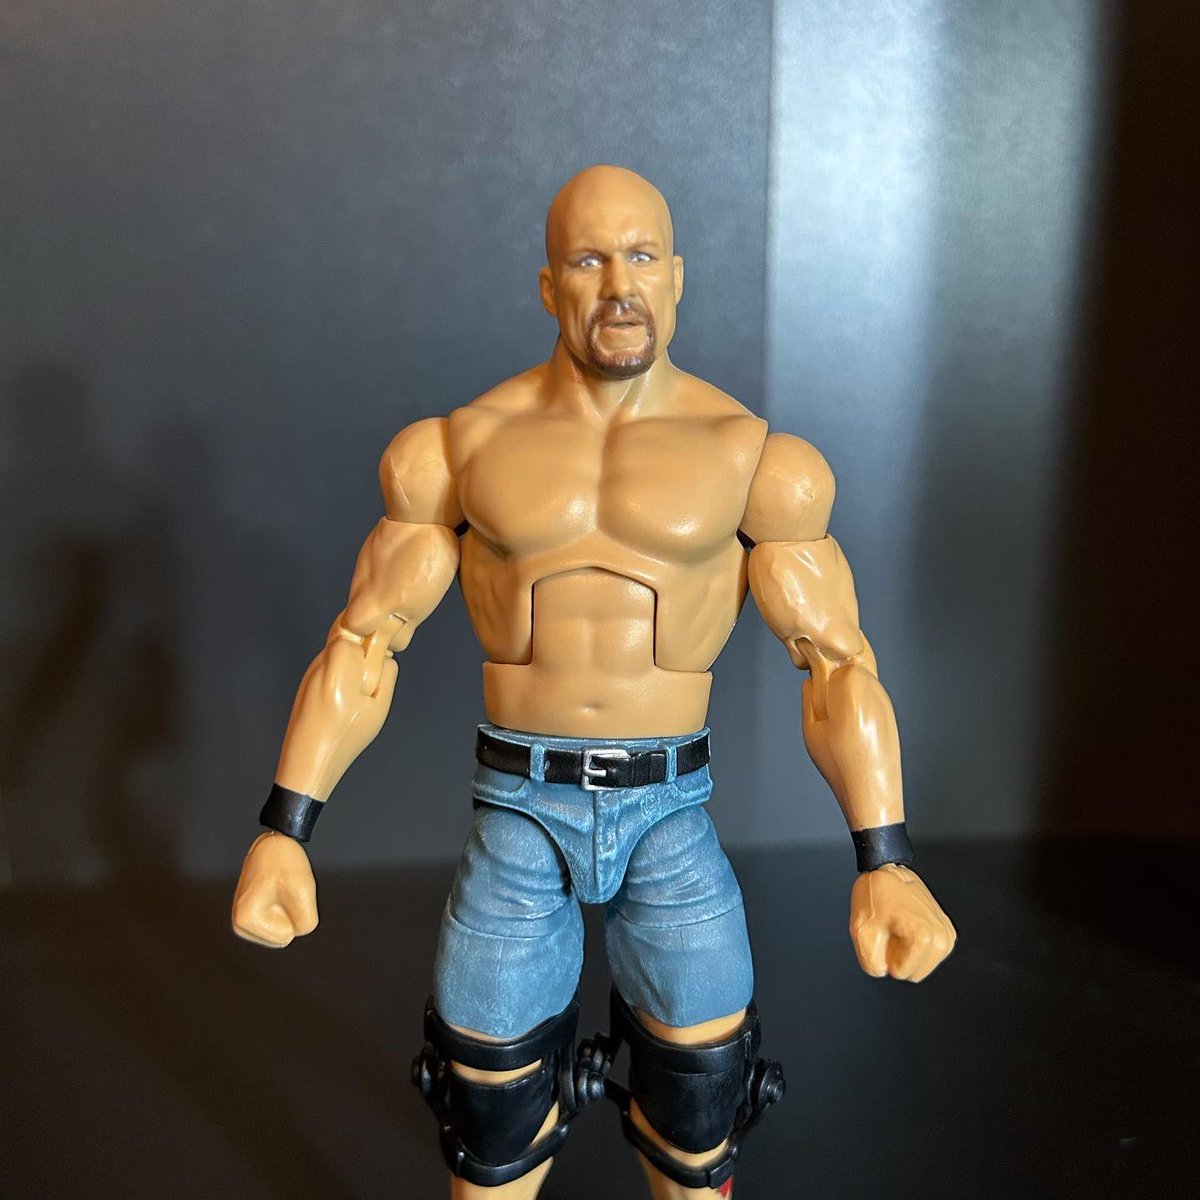 Then Now Forever Elite 4-Pack “Stone Cold” Steve Austin #toycollector #toyhunter #toycollection #collectibles #actionfigures #actionfigurecollector #actionfigurecollection #wwe #wwemattel #stonecoldsteveaustin #wweelite